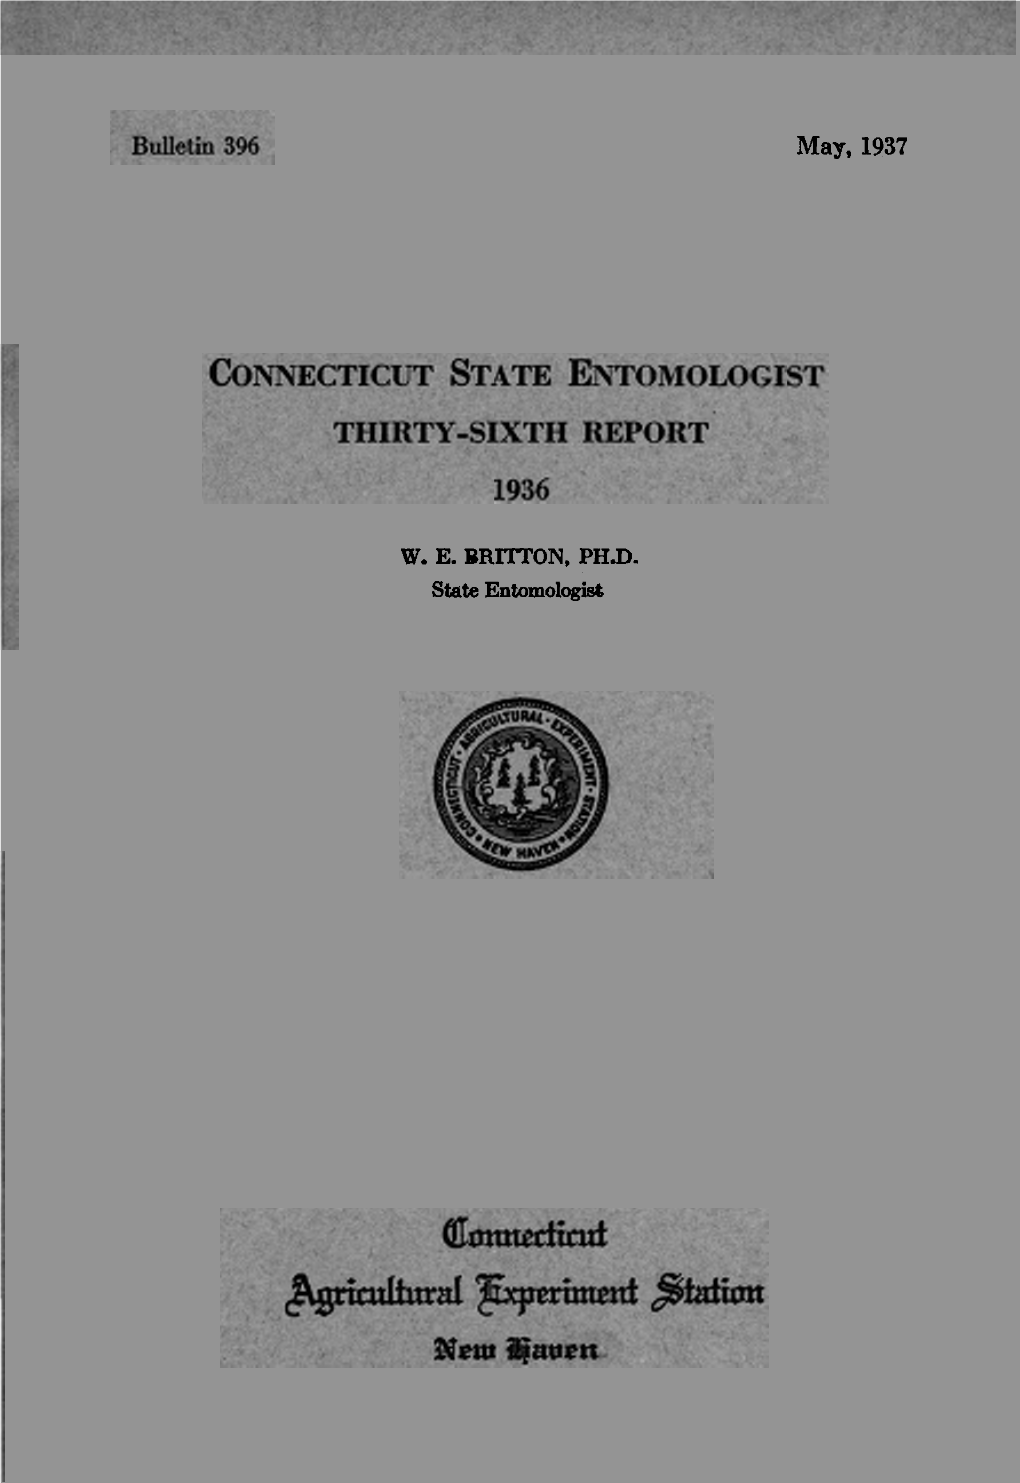 Connecticut State Entomologist. Thirty-Sixth Report 1936